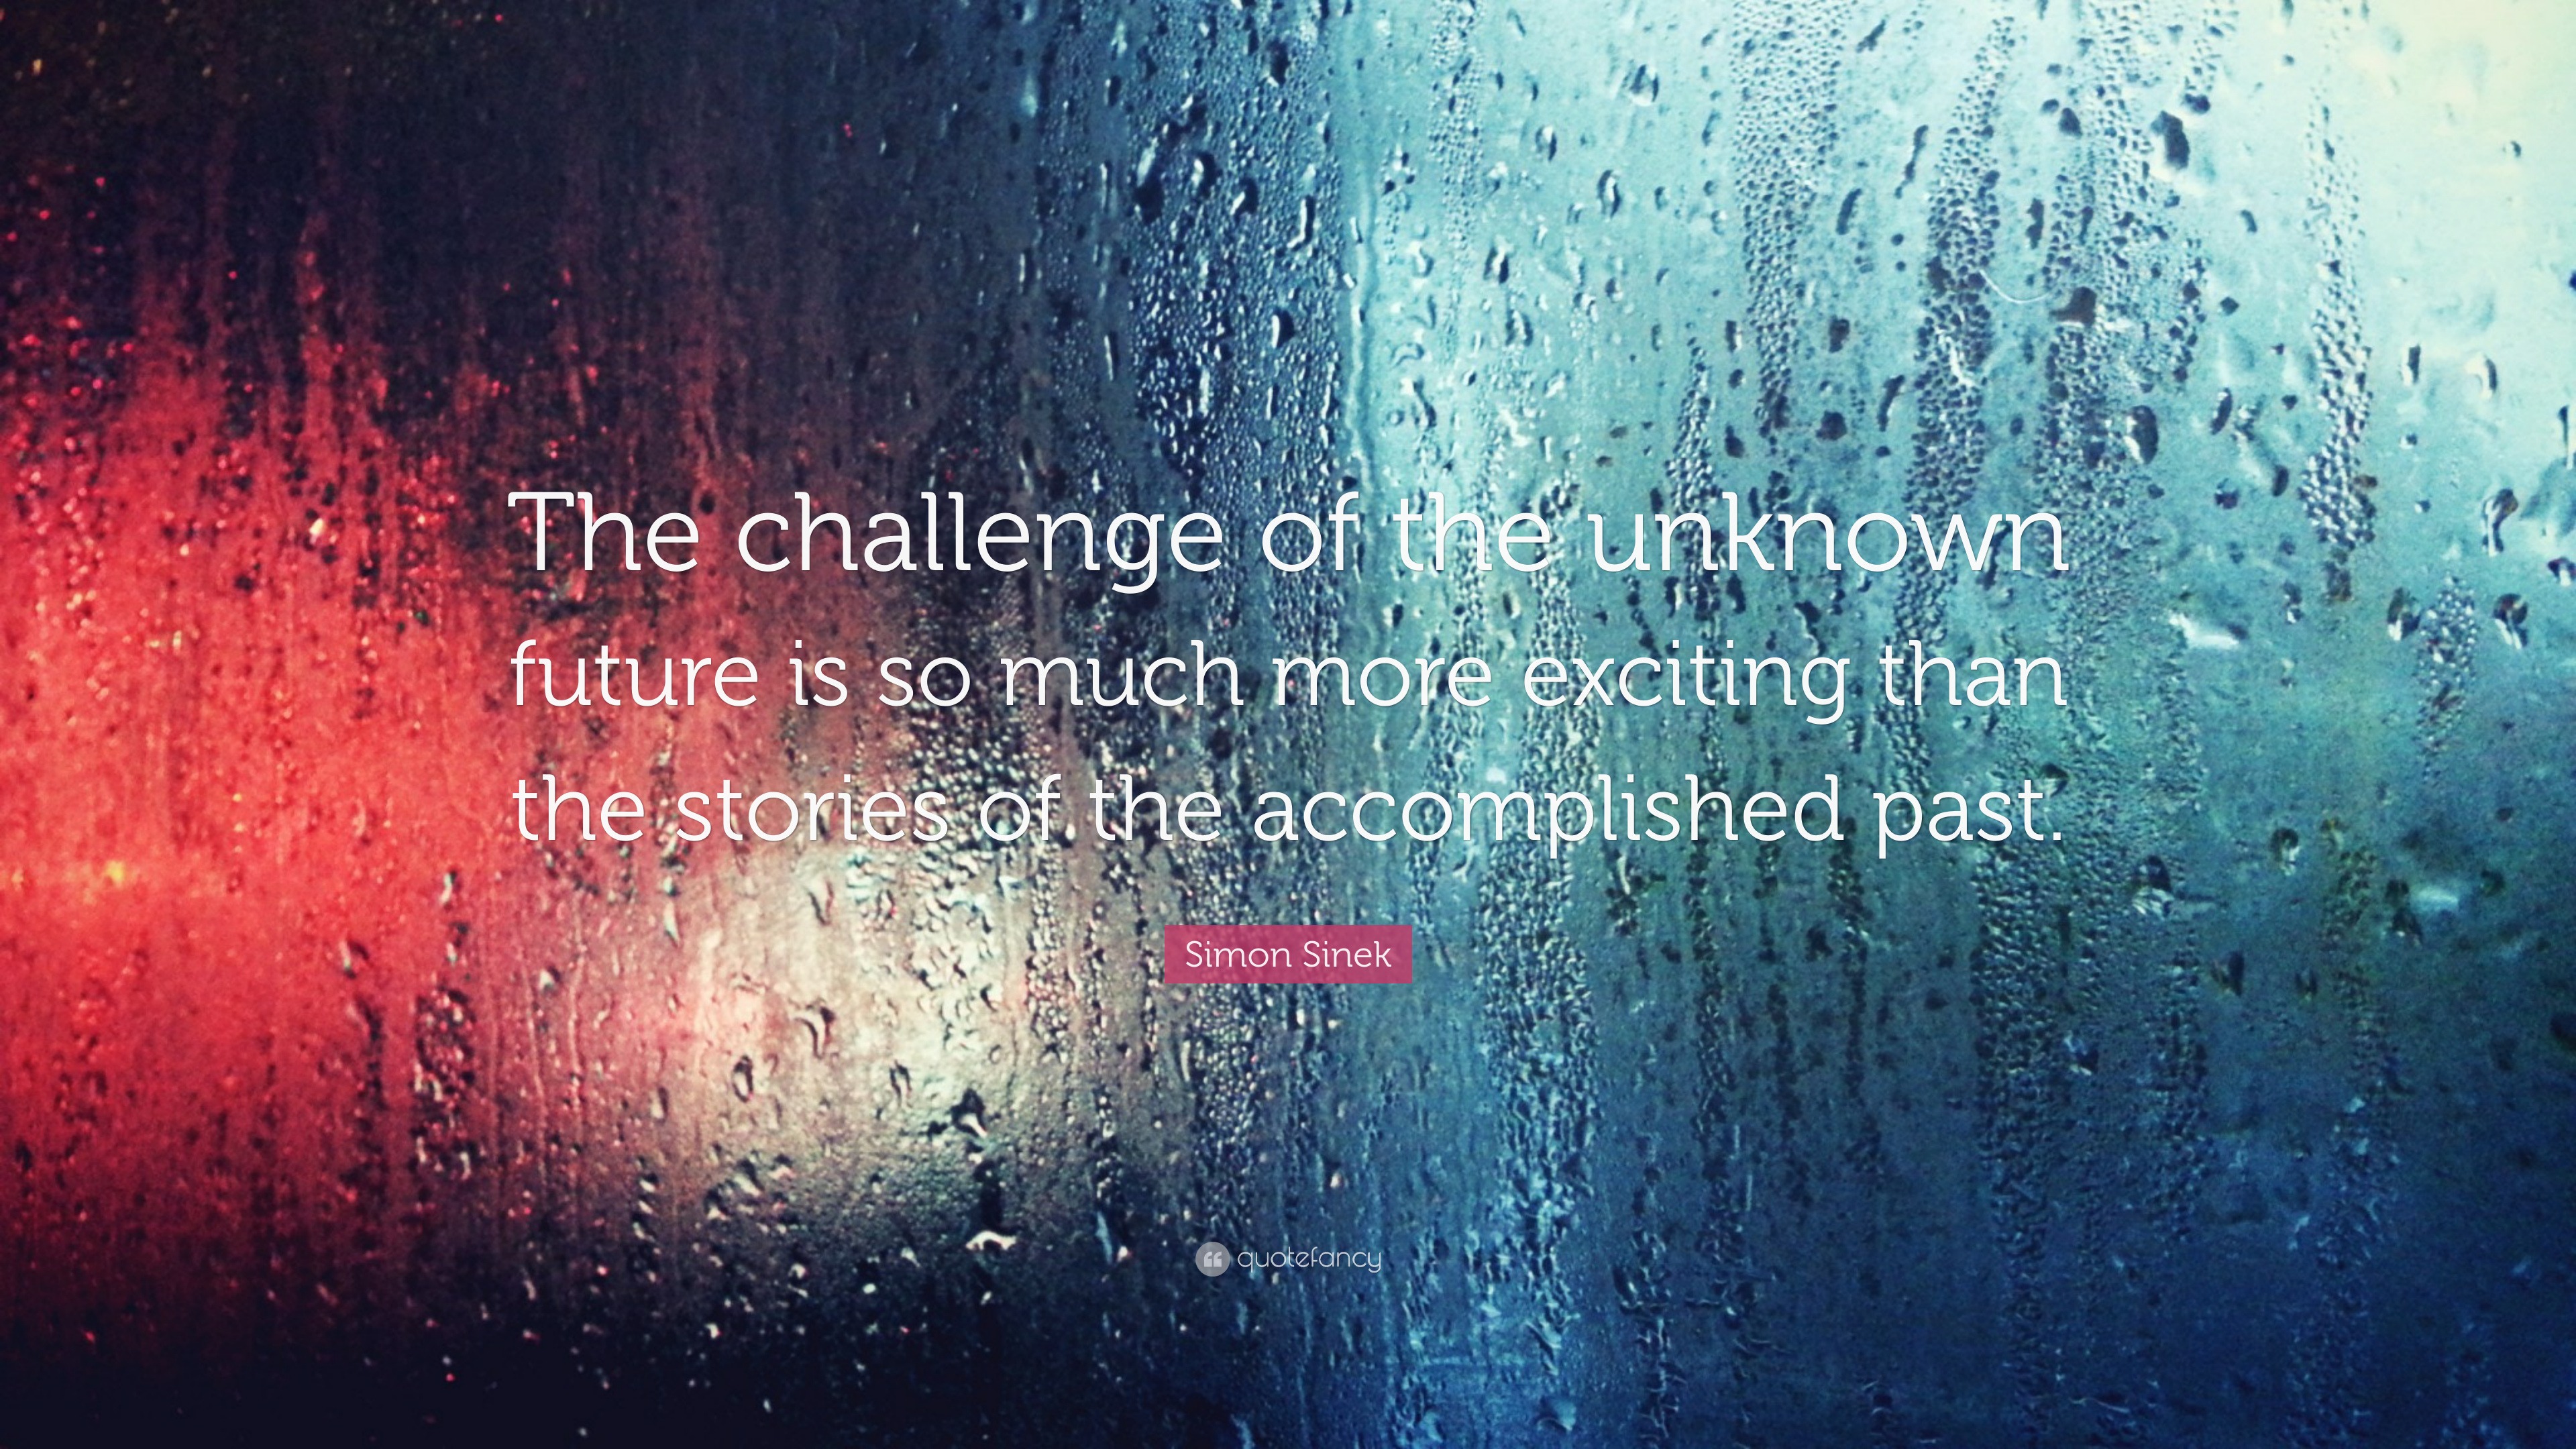 Simon Sinek Quote: “The challenge of the unknown future is so much more